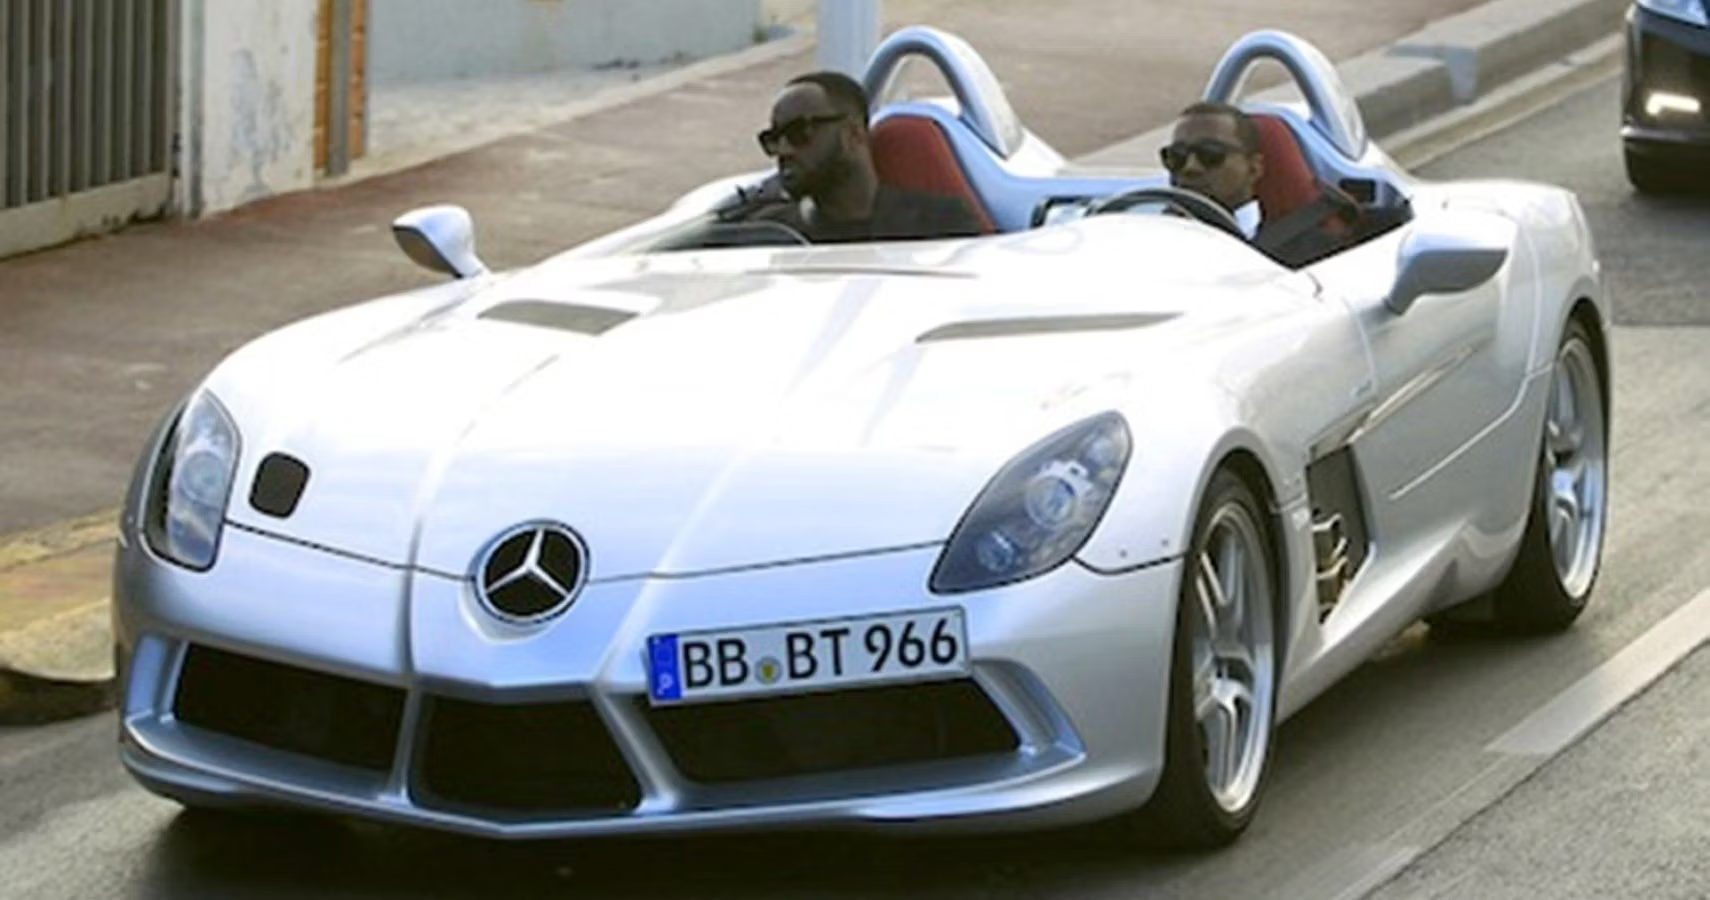 A Peek At Kanye West’s Luxury Car Collection